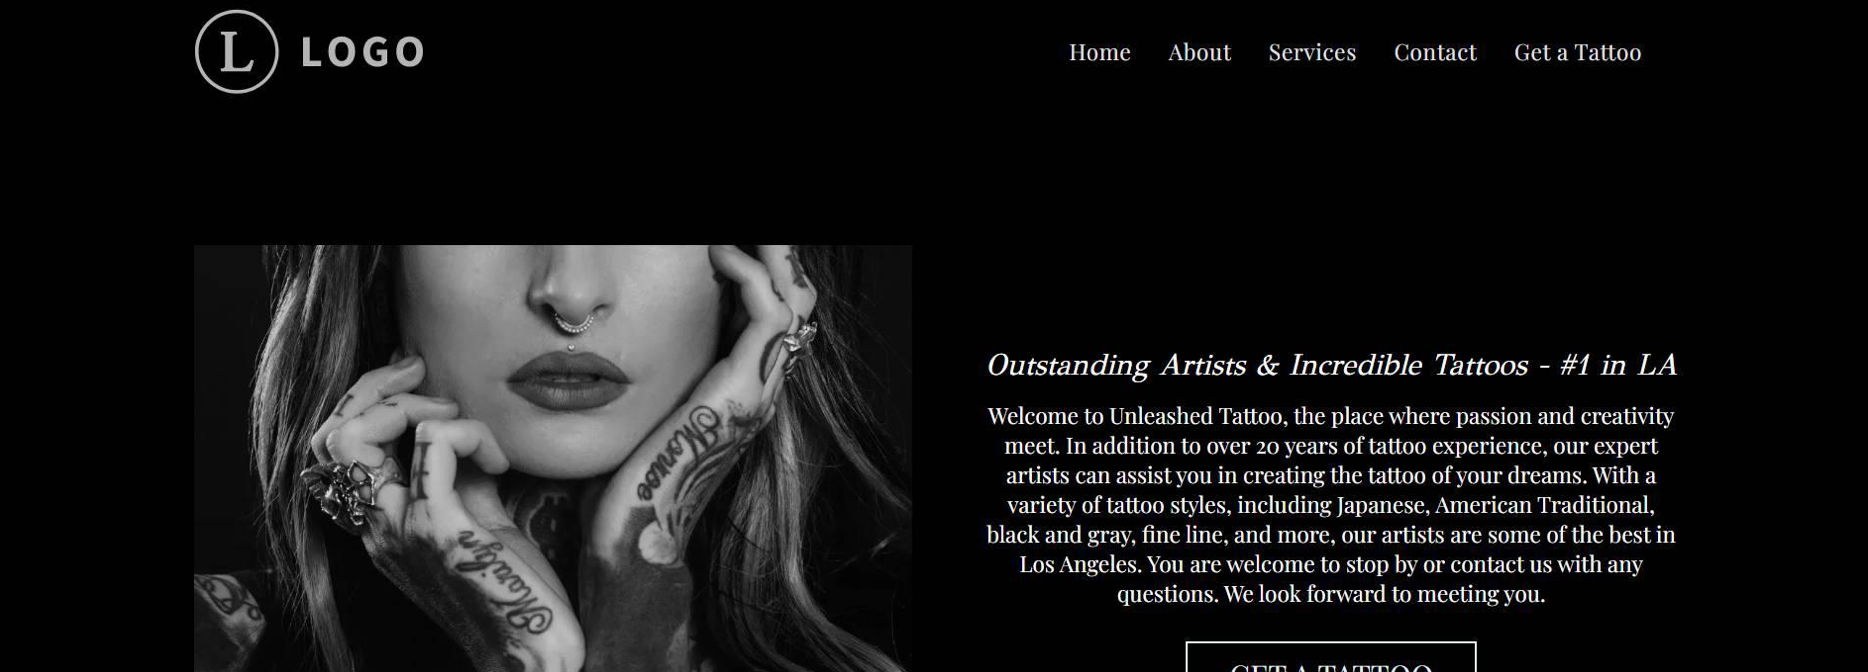 Example of a tattoo website template